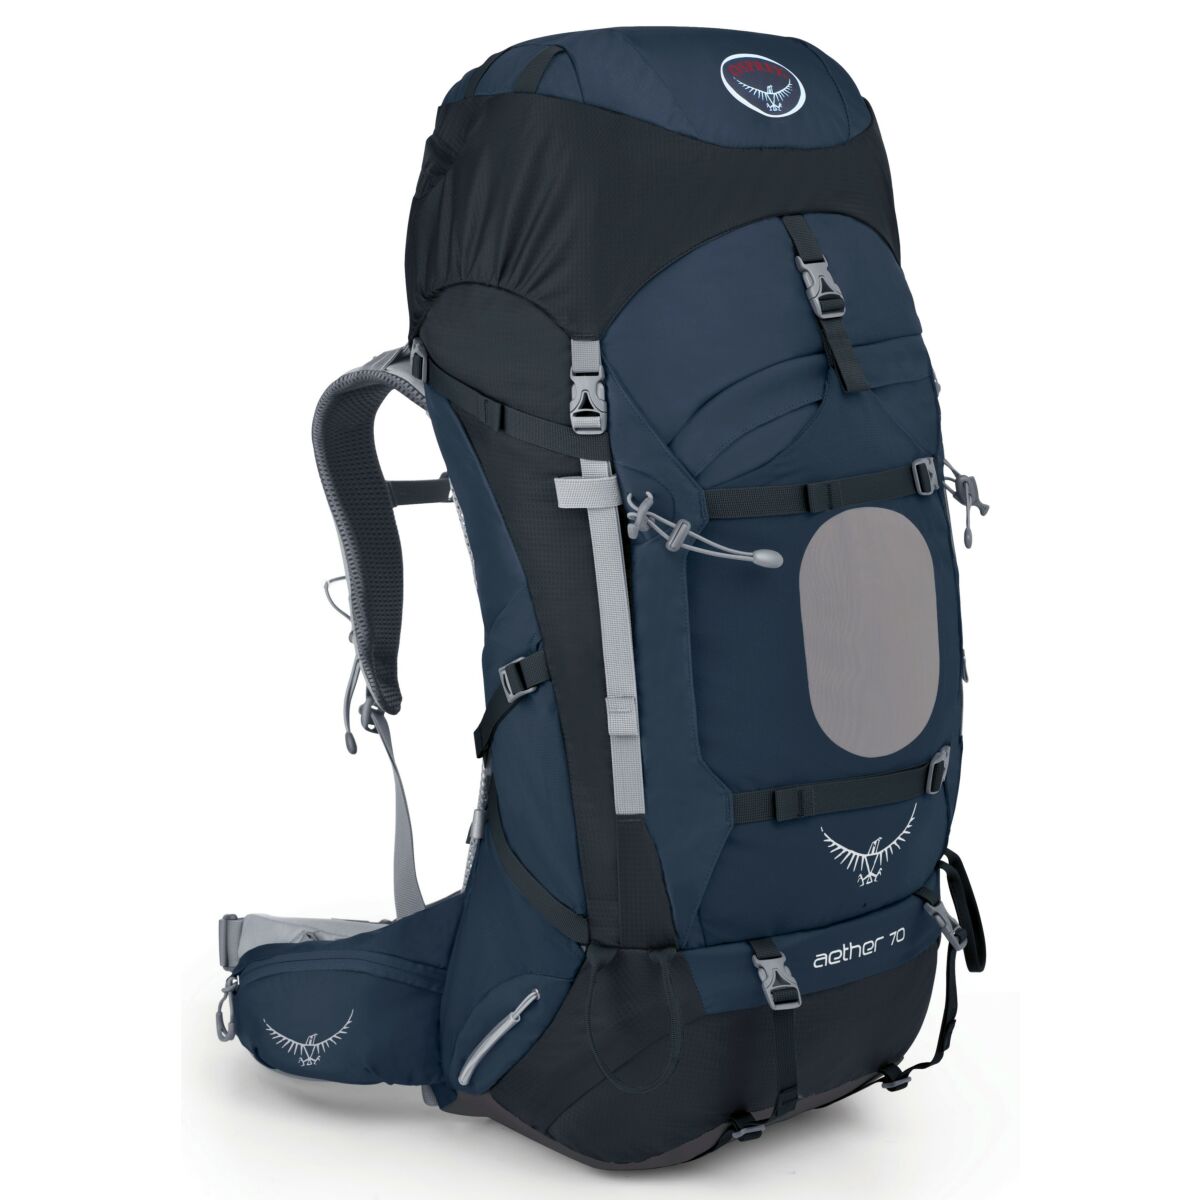 Osprey Aether 70 Review: Most Versatile Trekking Backpack?